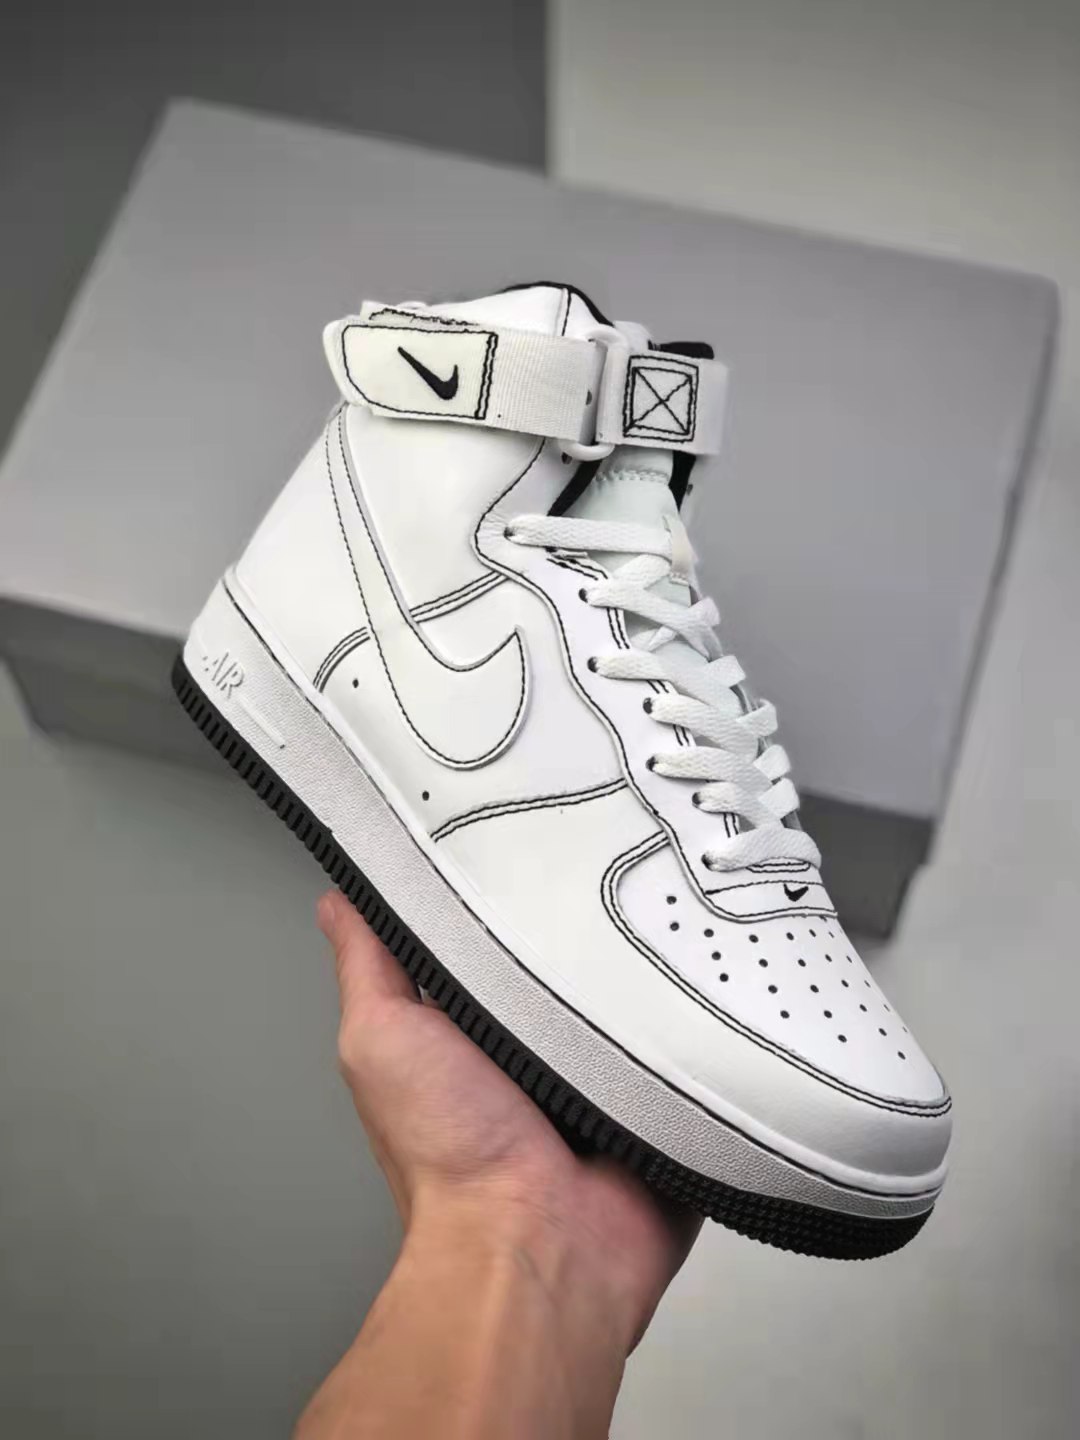 Nike Air Force 1 High 07 White Black CV1753-104 - Classic Design and Iconic Style for Every Sneakerhead!